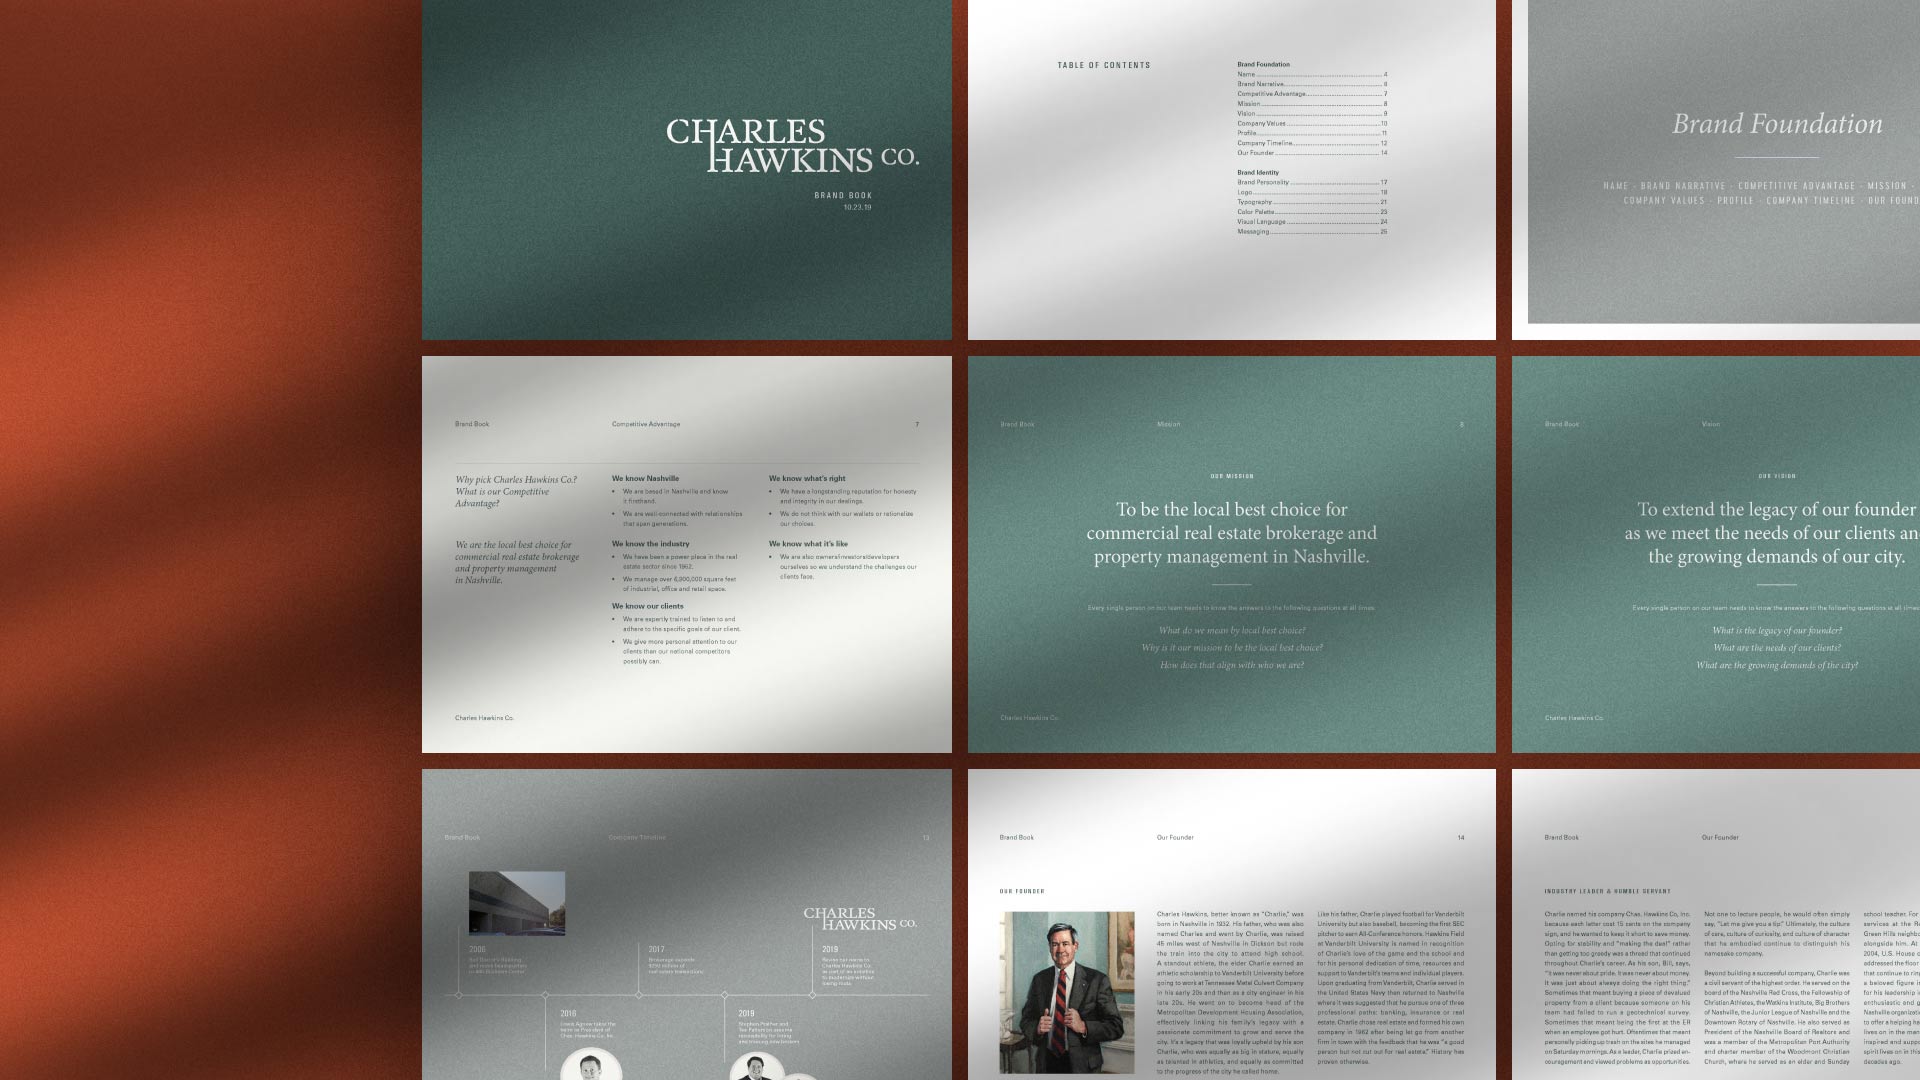 Spread of papers showing the brand guide for Charles Hawkins